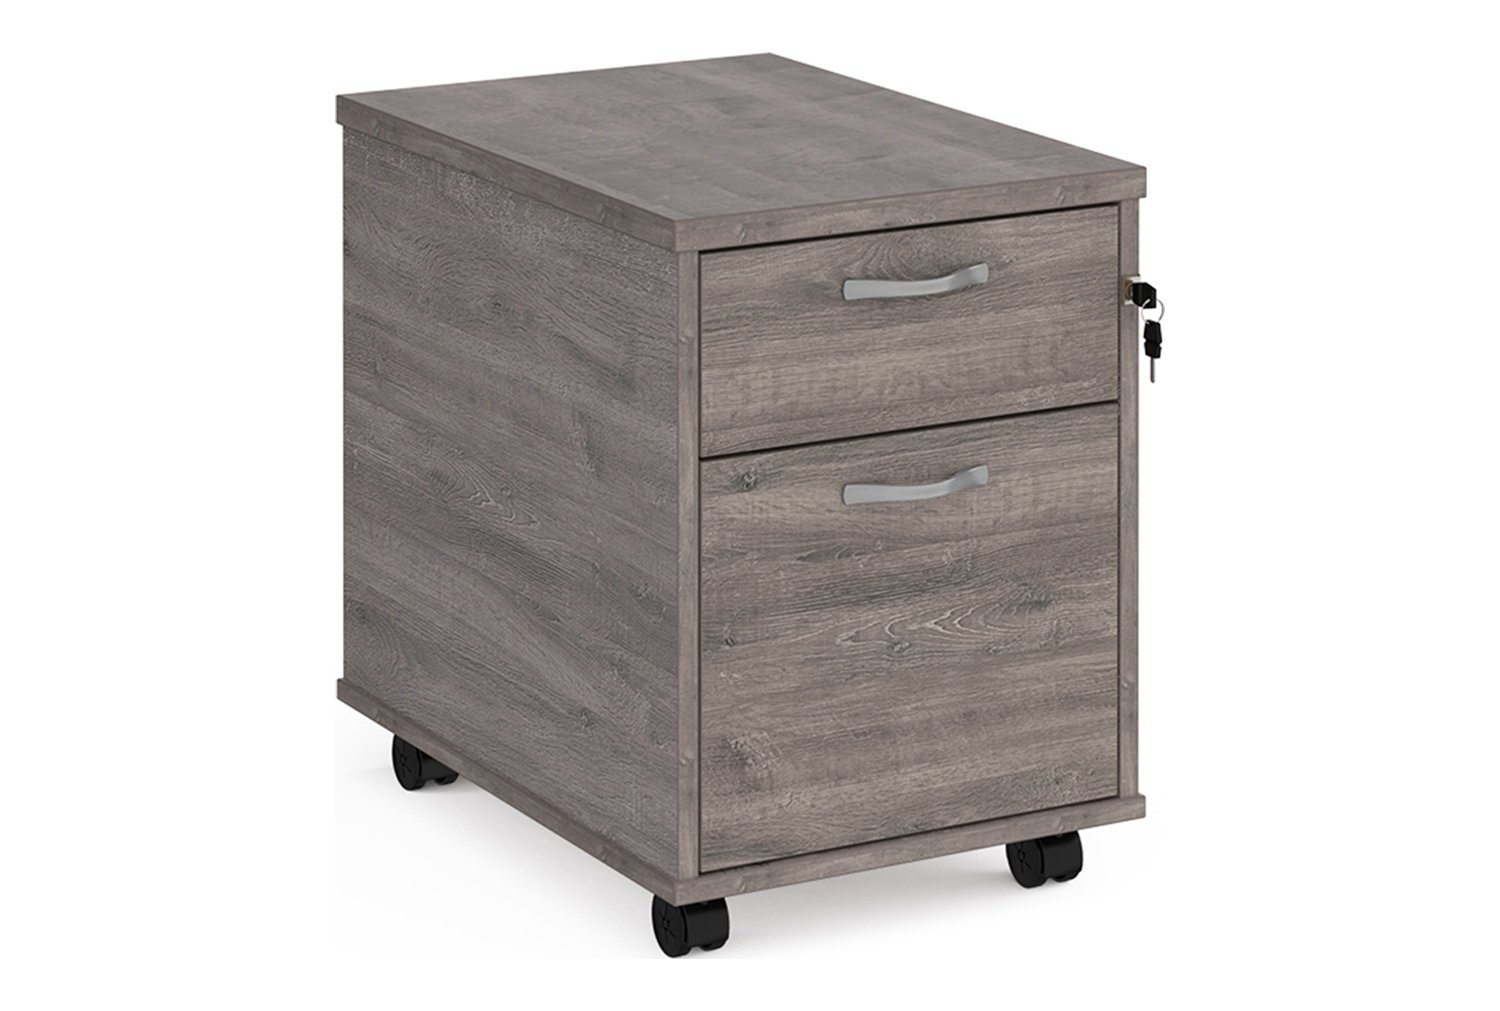 Thrifty Next-Day Mobile Pedestal Grey Oak, 2 Drawer - 43wx60dx57h (cm), Express Delivery